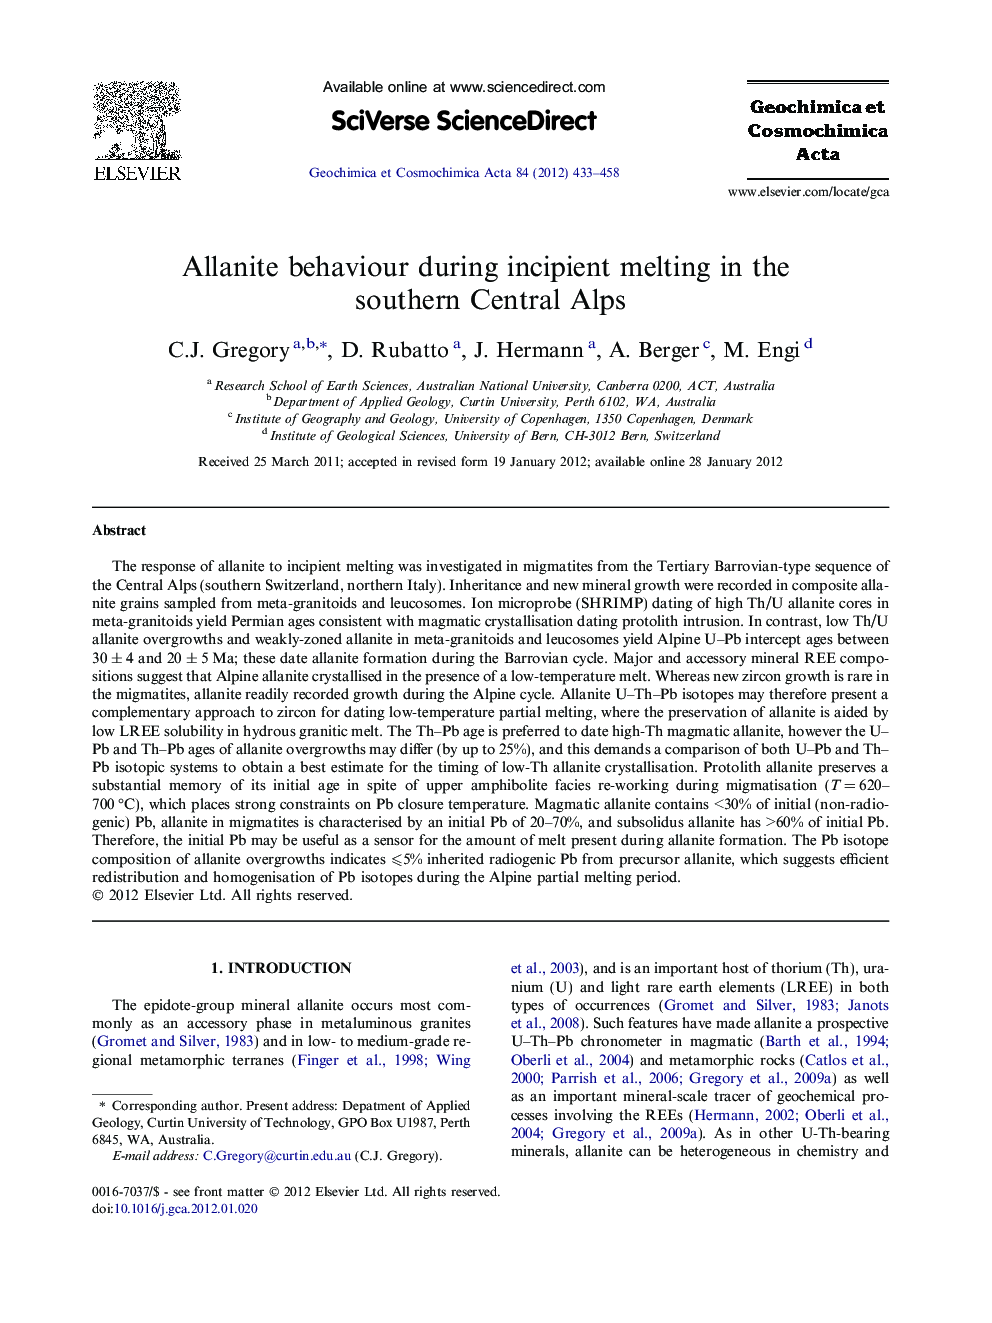 Allanite behaviour during incipient melting in the southern Central Alps